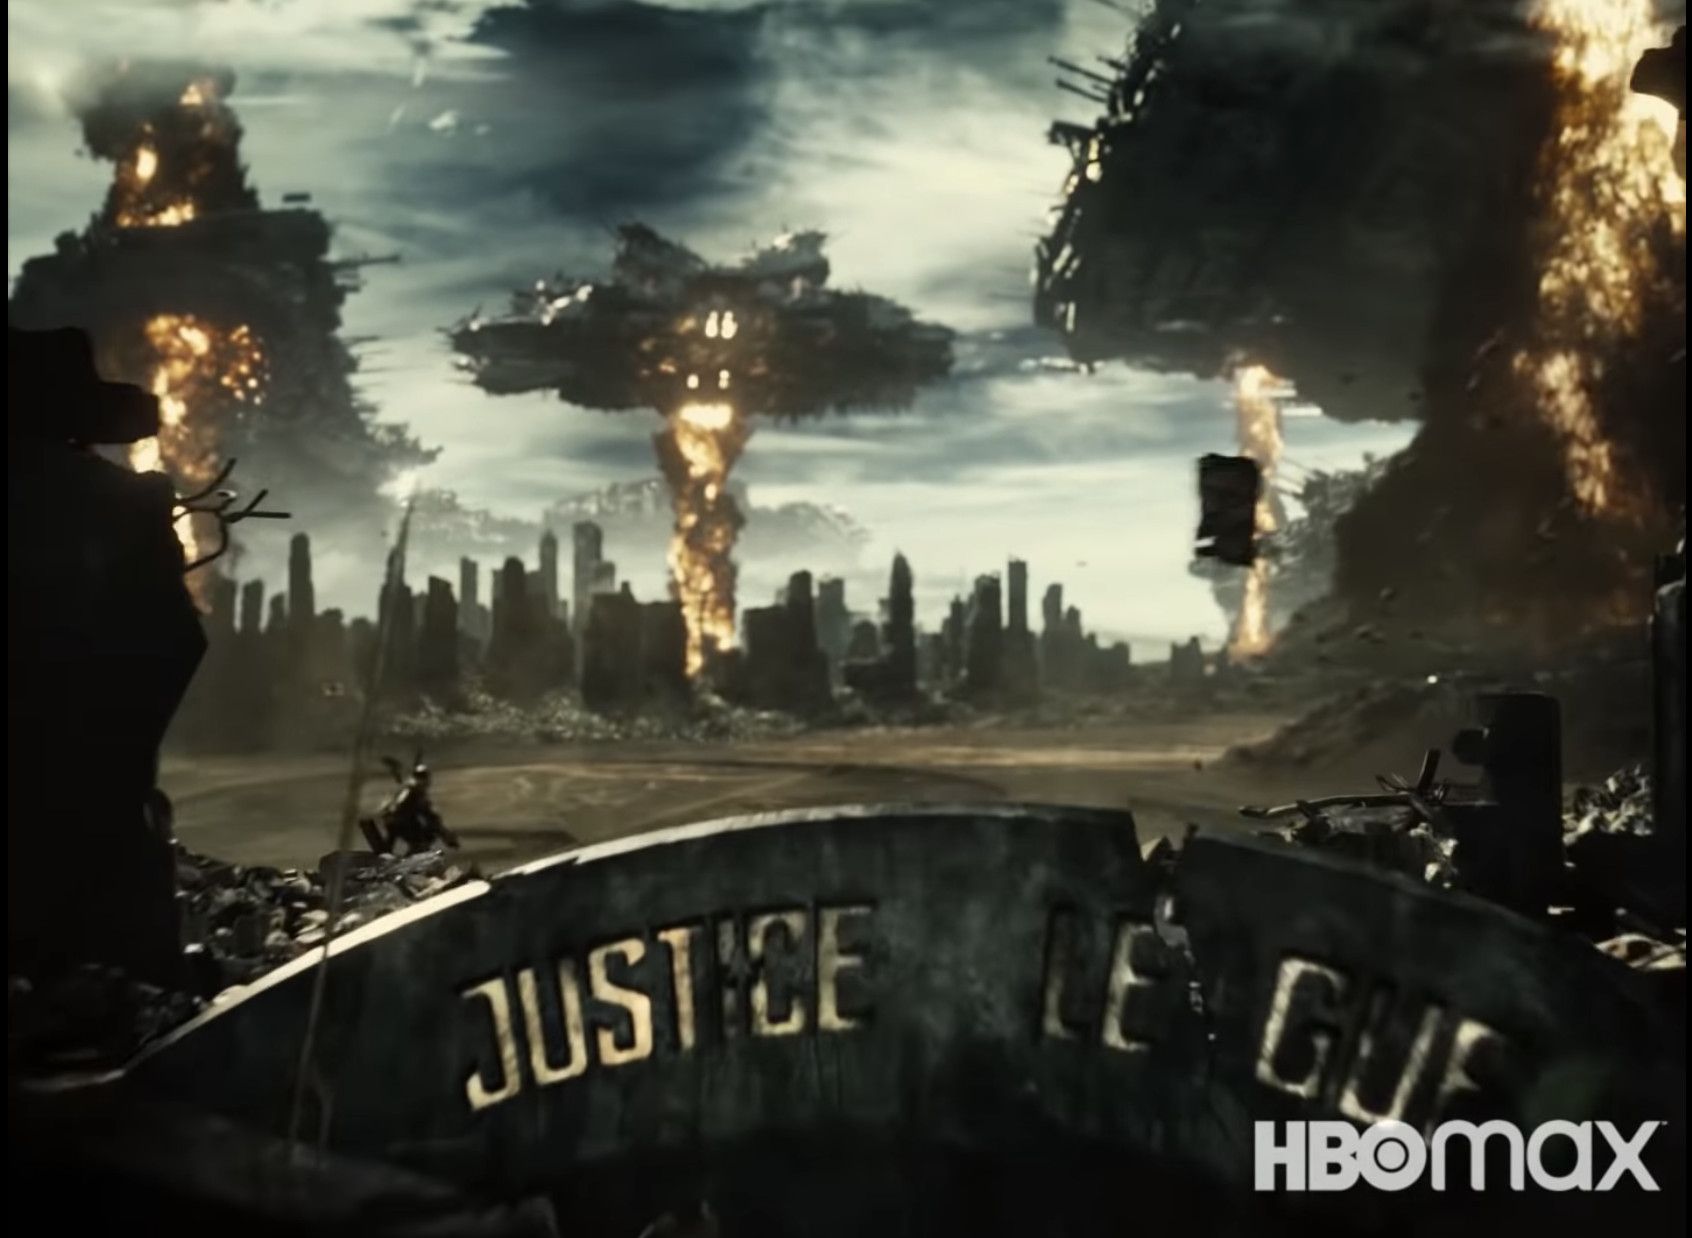 The Hall of Justice Destroyed